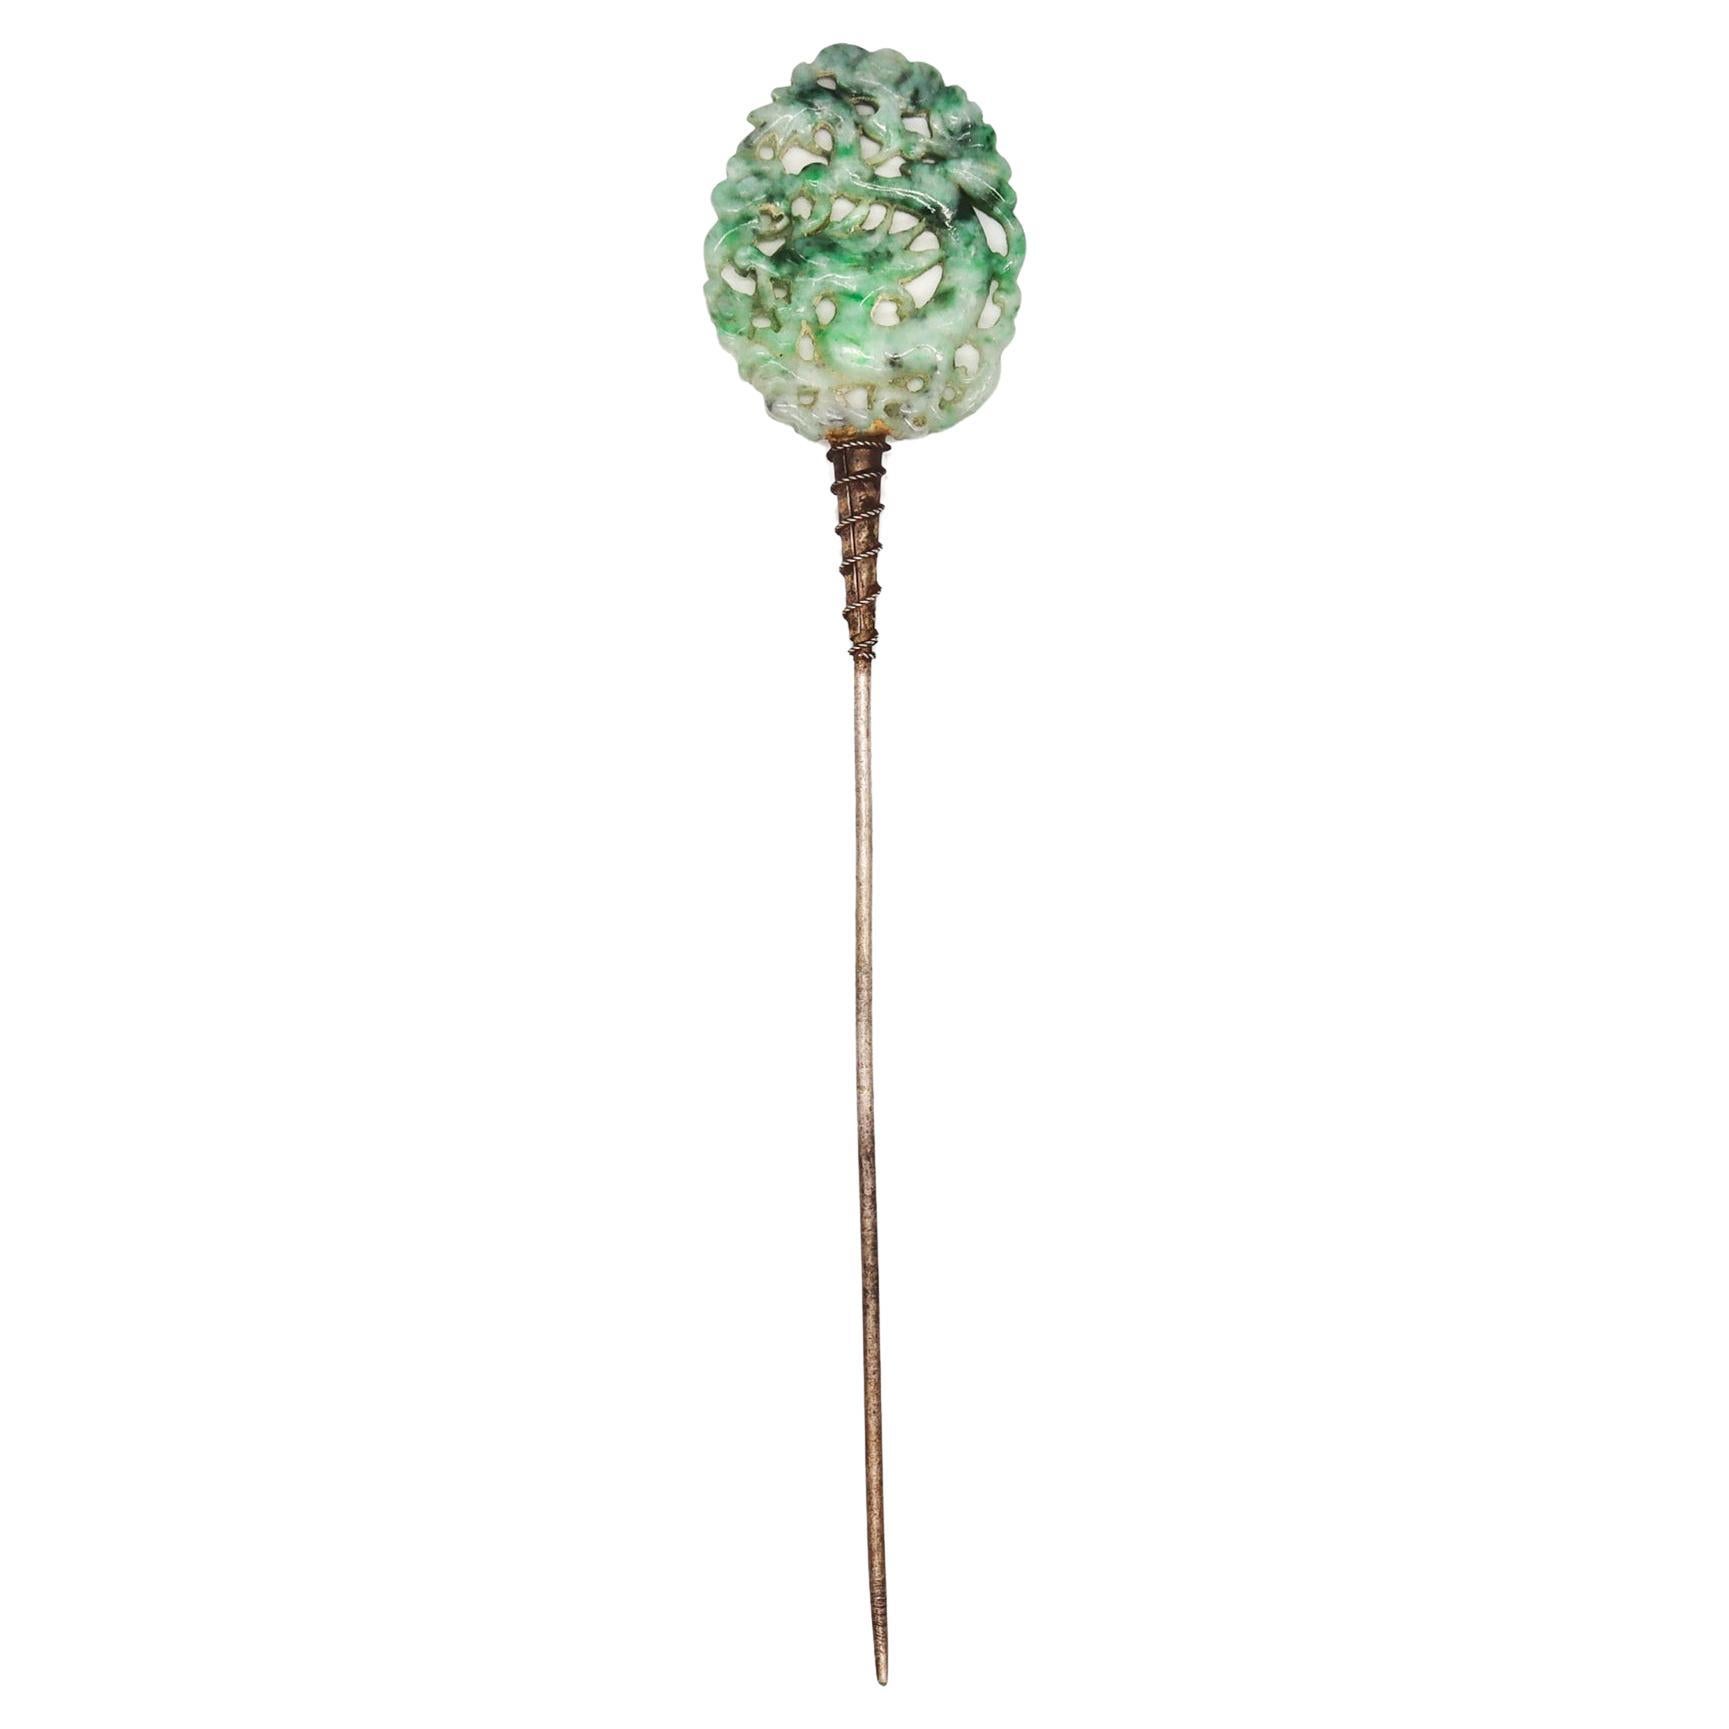 Art Deco 1920 Hat Dress Stick Pin in .800 Silver with Carved Nephrite Green Jade